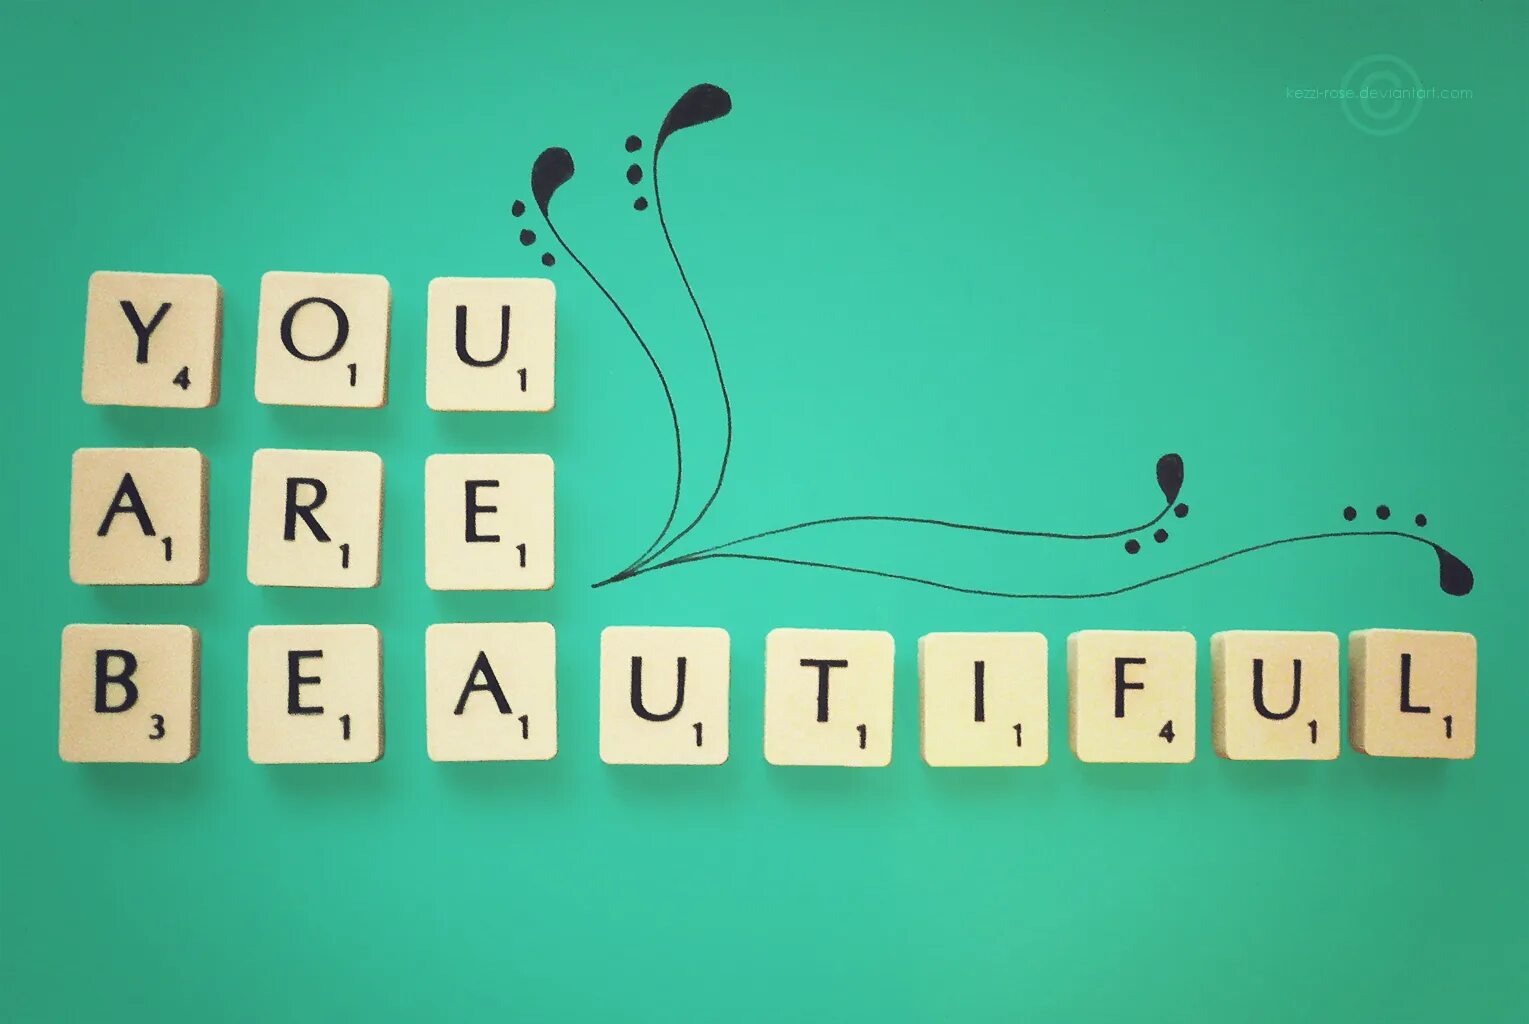 You are. You are picture. You are beautiful. You are beautiful picture.